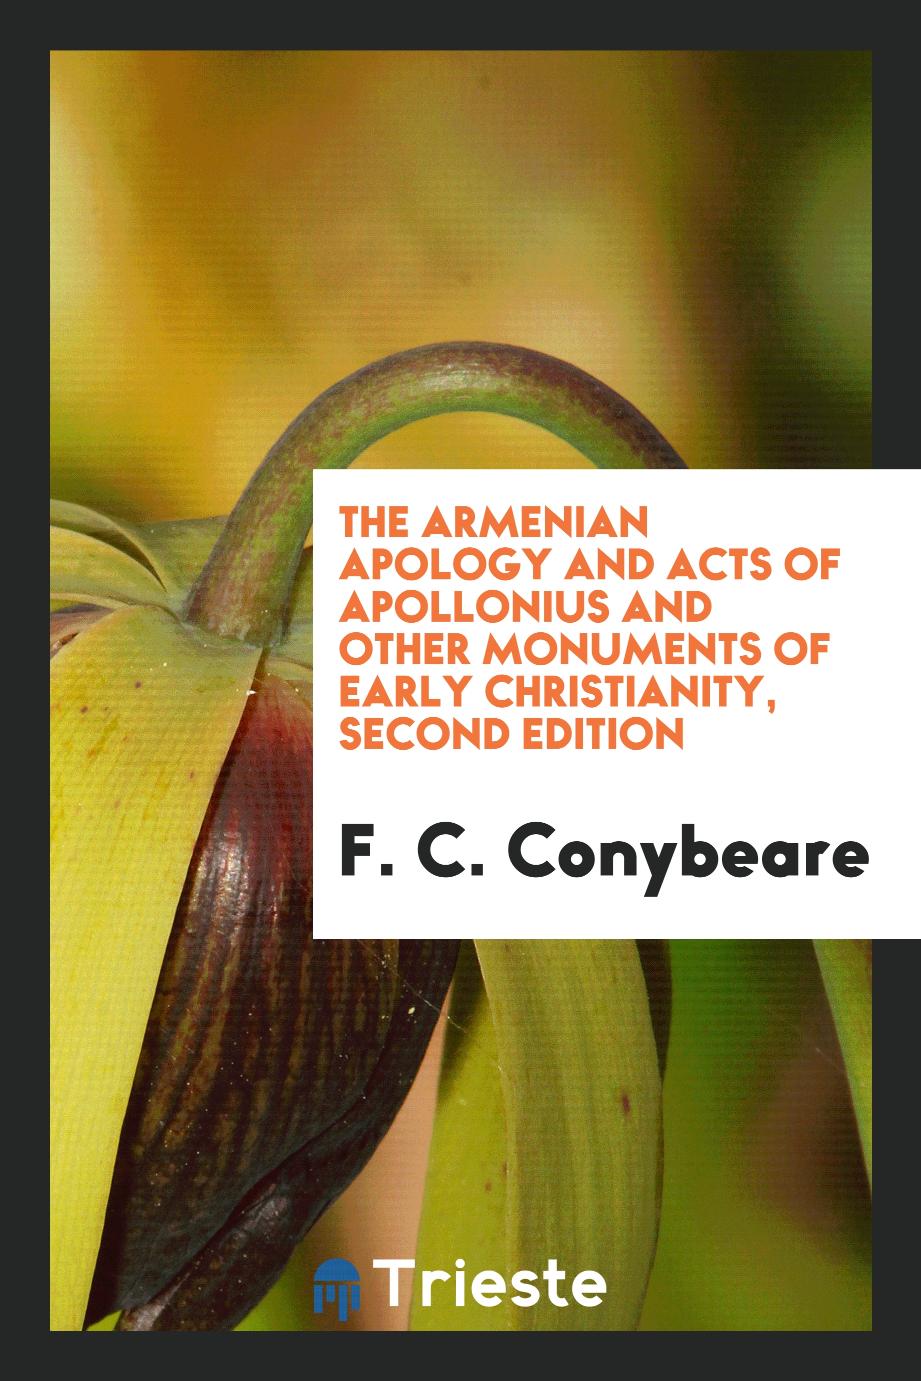 The Armenian Apology and Acts of Apollonius and Other Monuments of Early Christianity, Second Edition